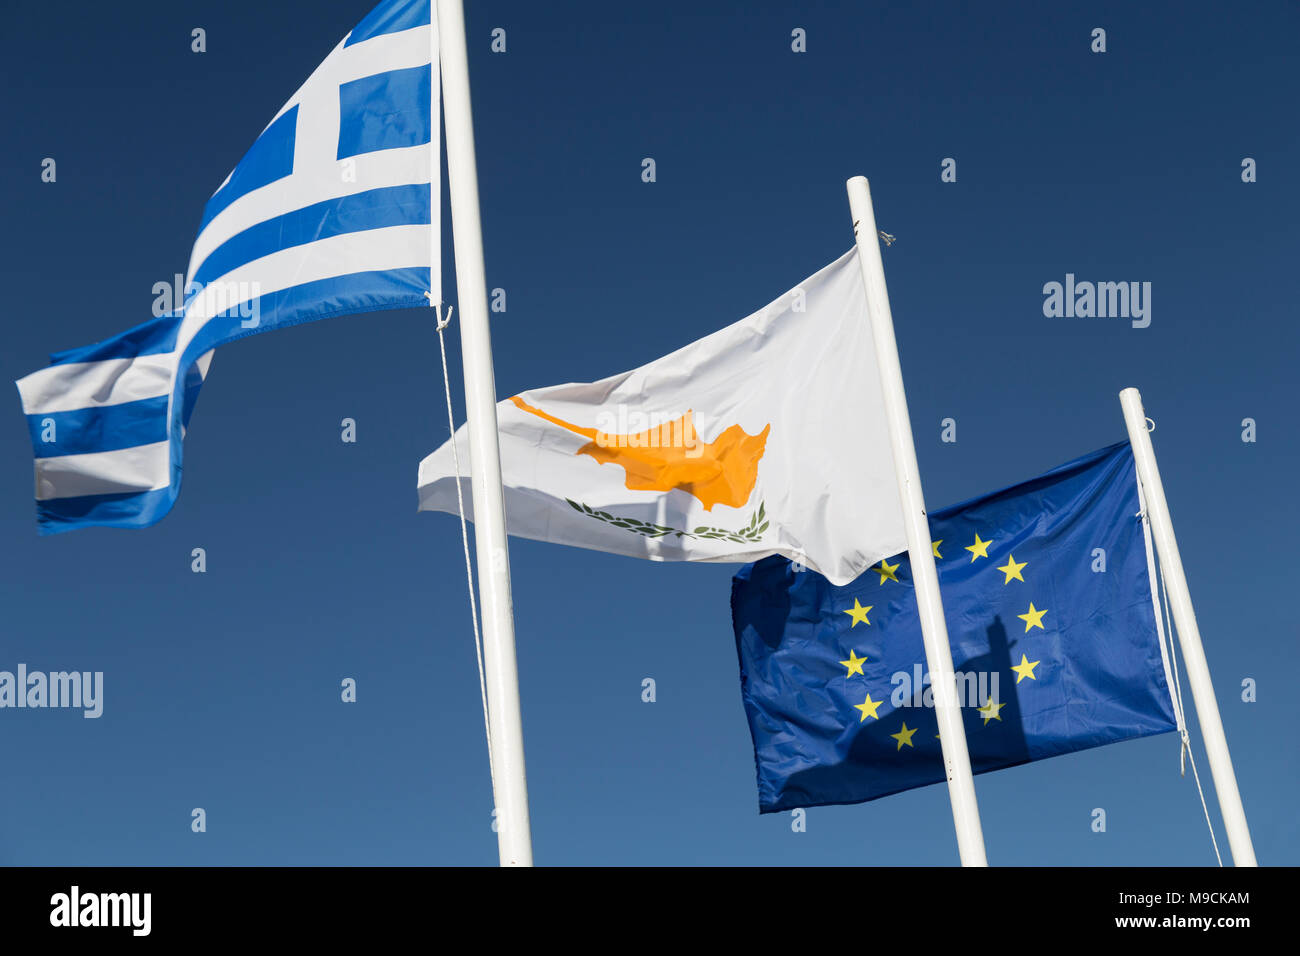 The flags of Greece, Cypus, and the European Union. Stock Photo